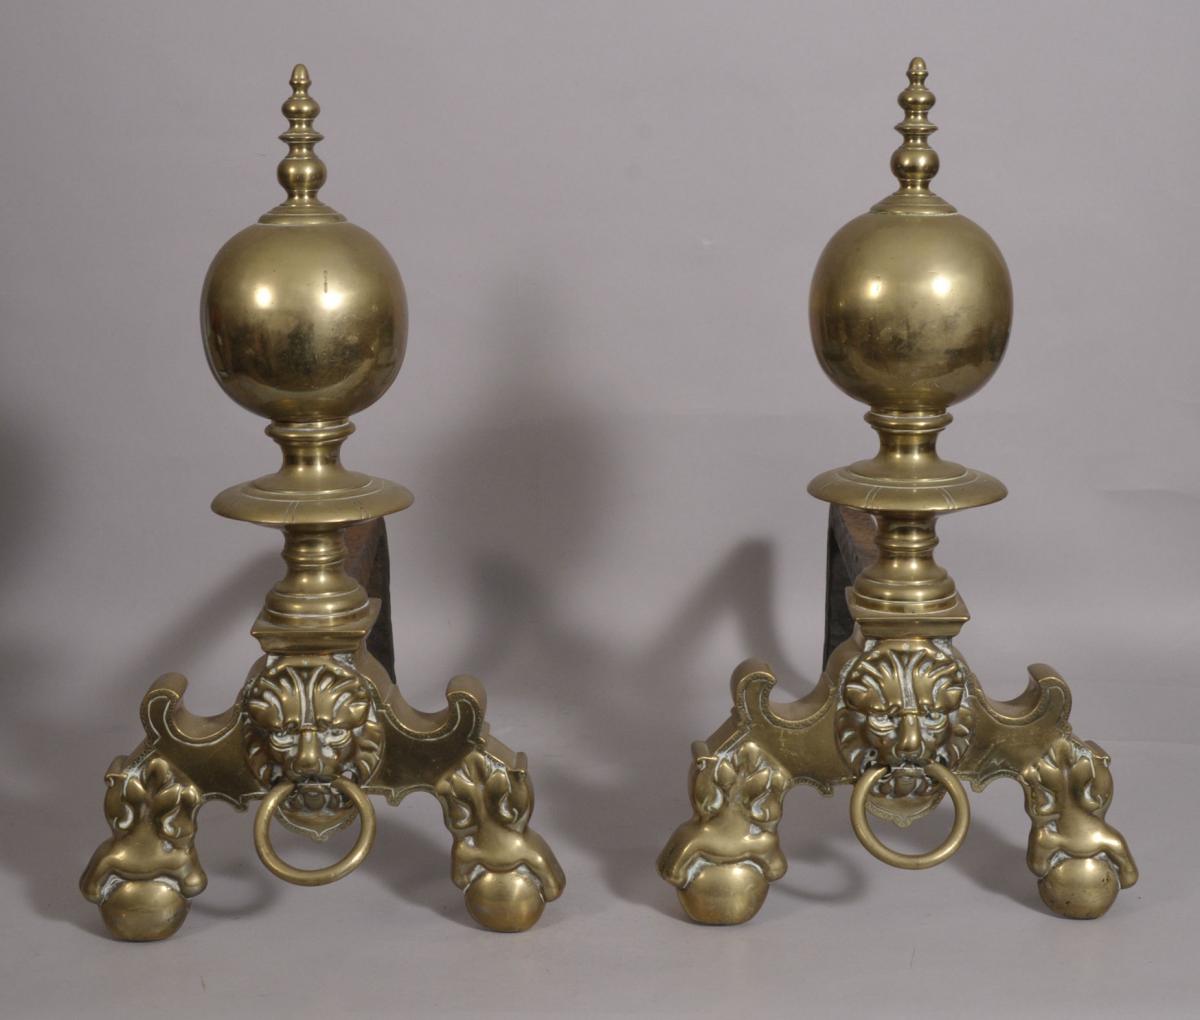 S/3389 Antique 19th Century Pair of Brass Andirons (Fire Dogs)